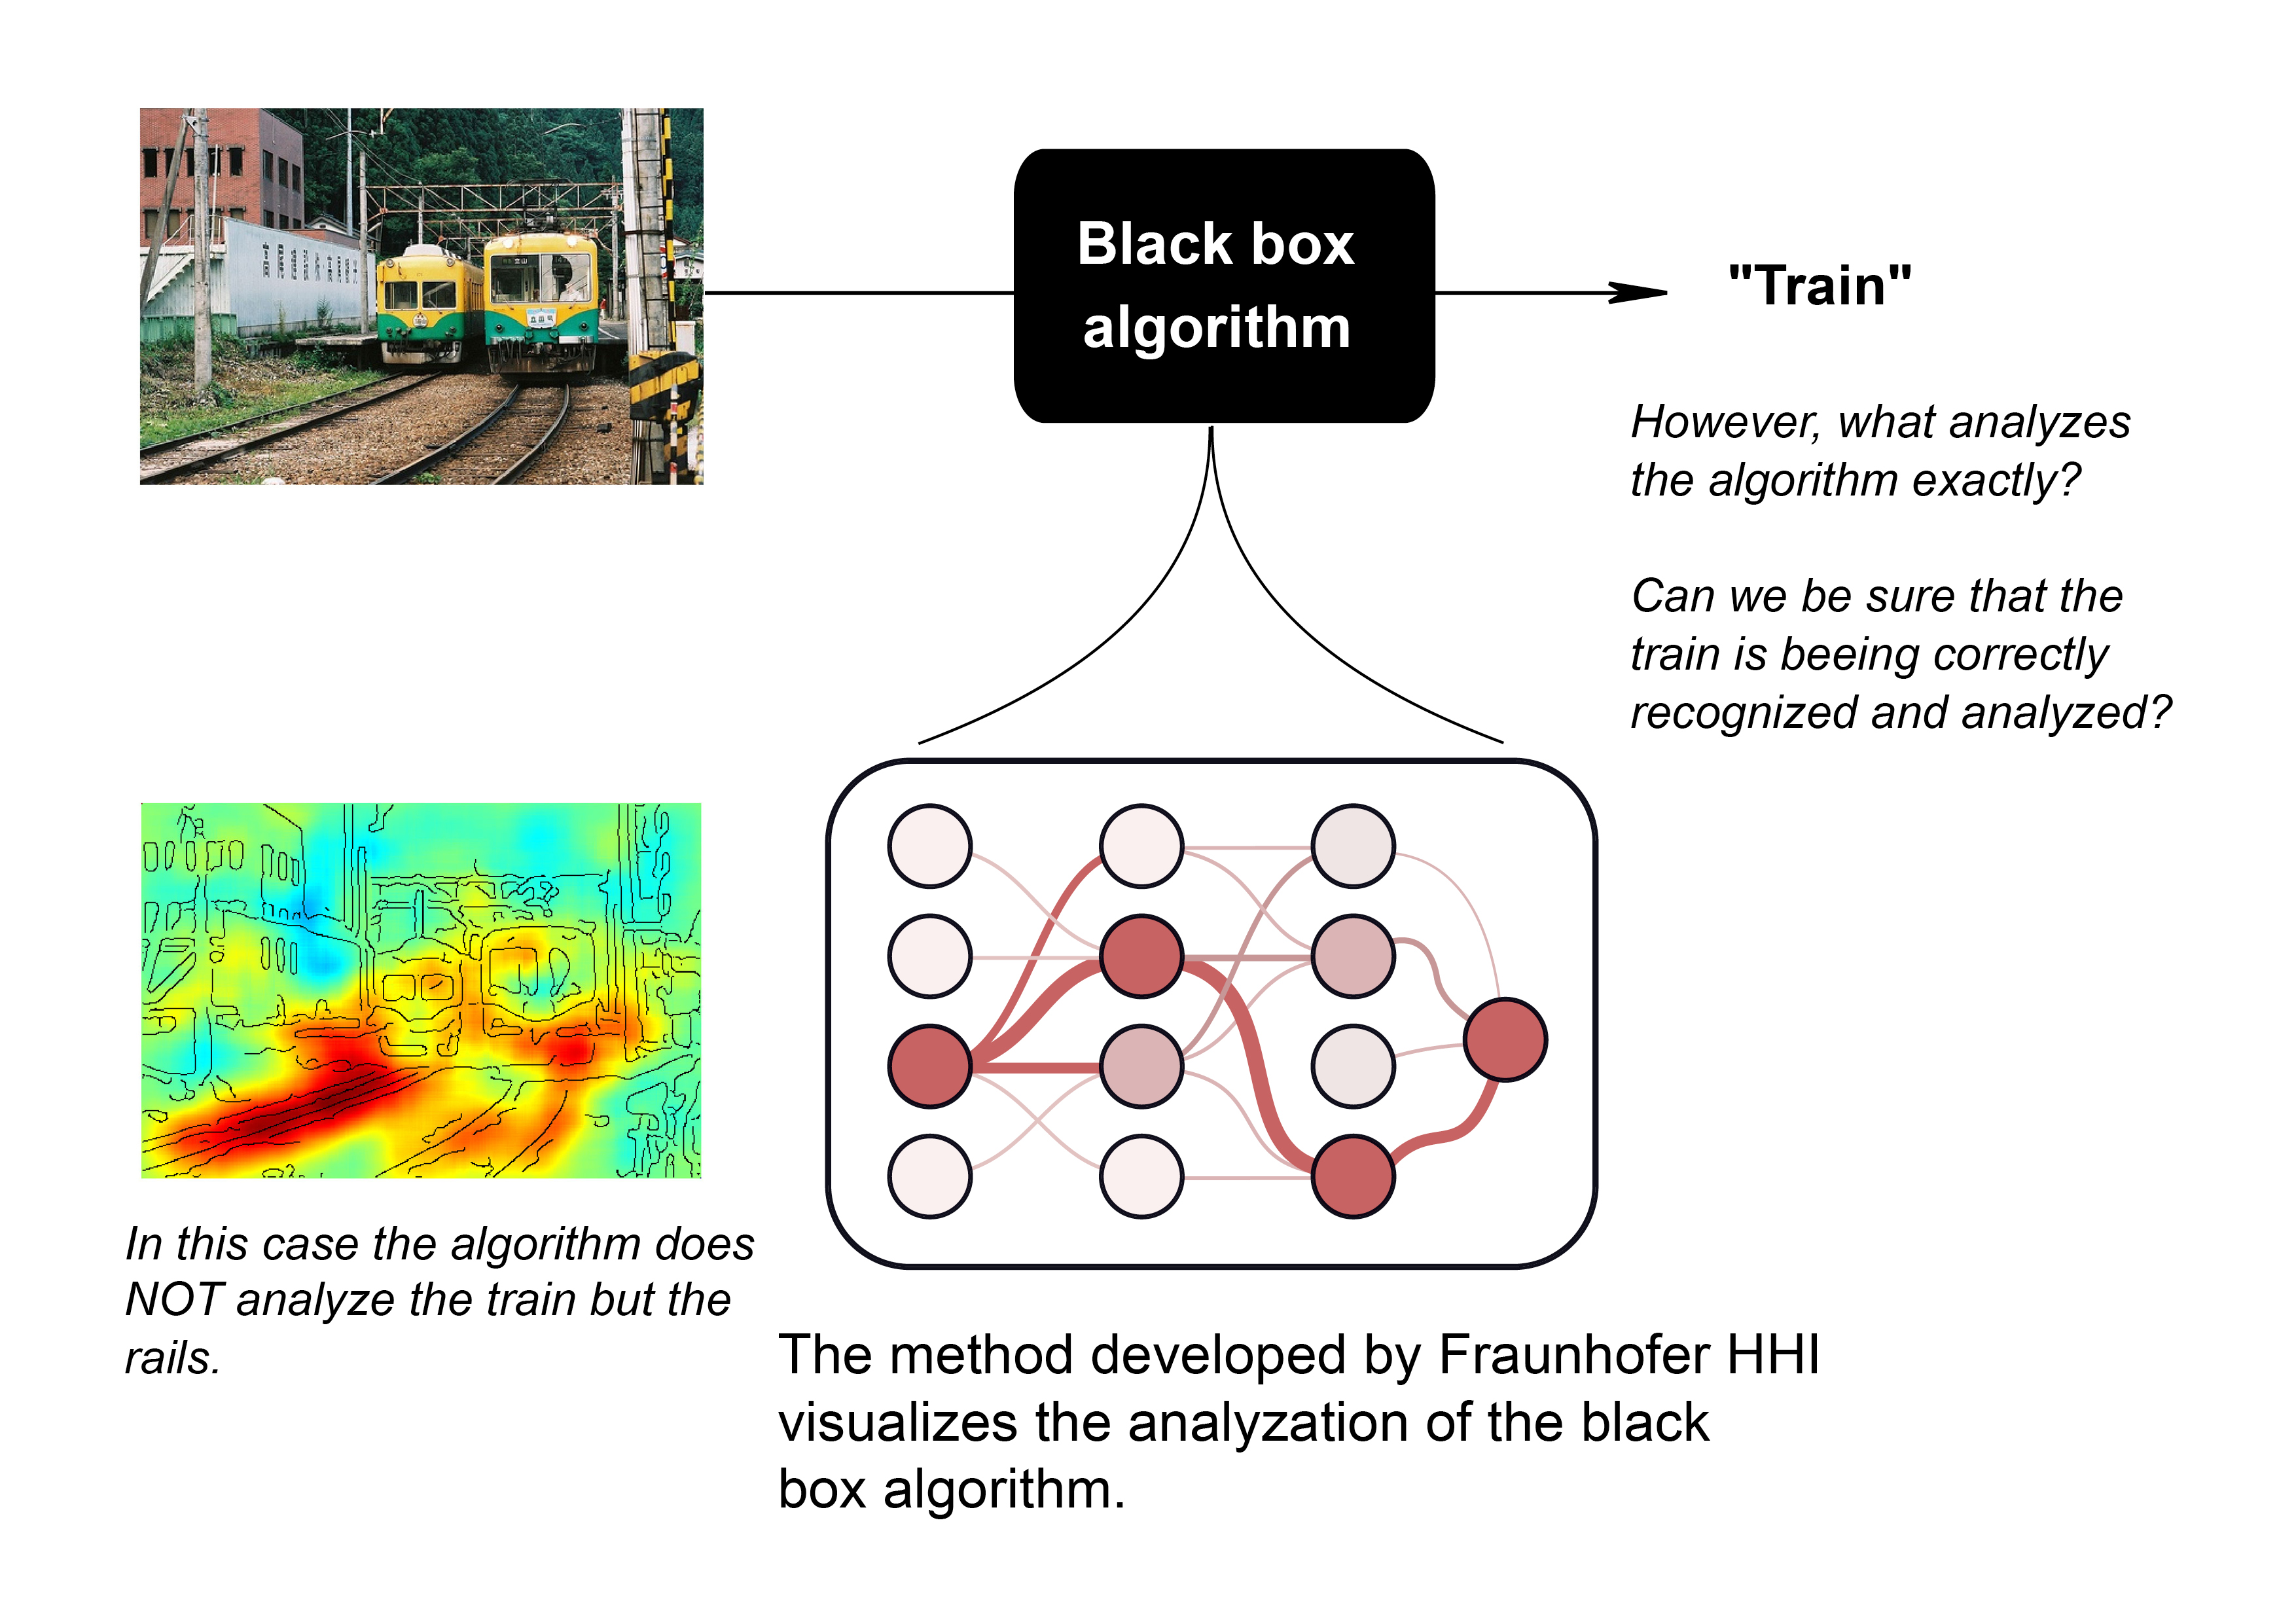 Fraunhofer HHI’s analysis software uses algorithms to visualize complex learning processes (schematic diagram).